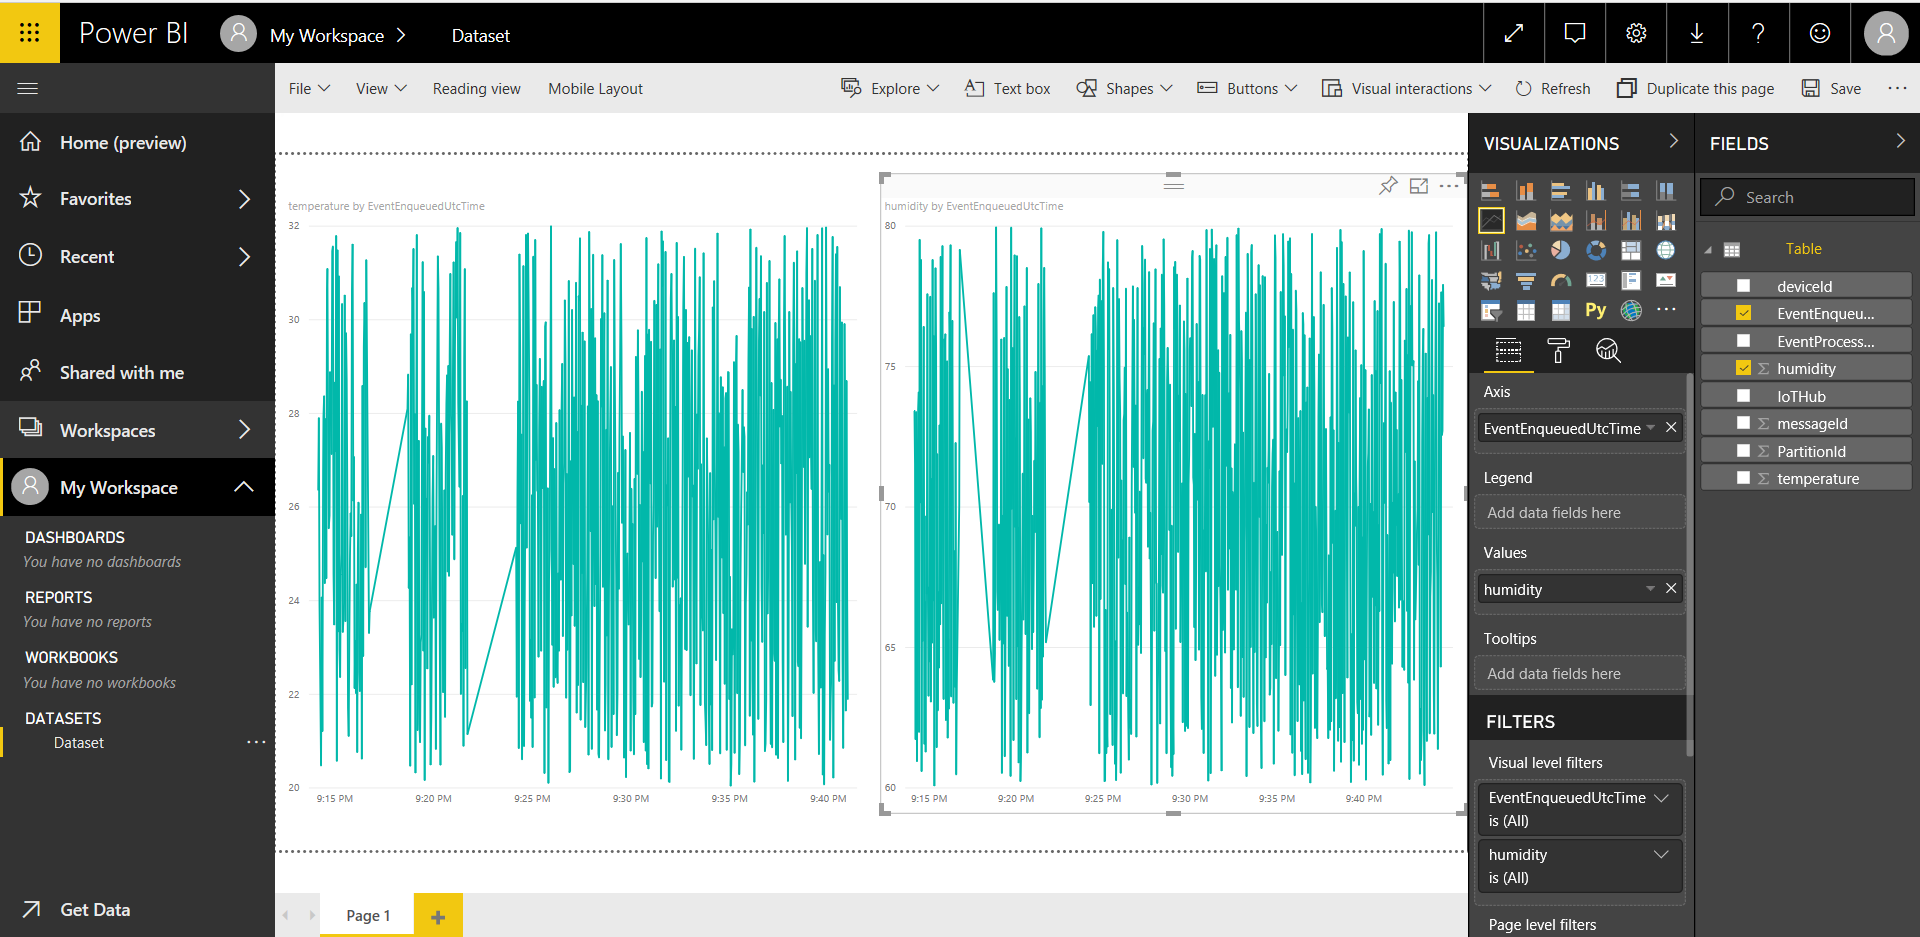 Add a line chart for humidity to a Microsoft Power BI report